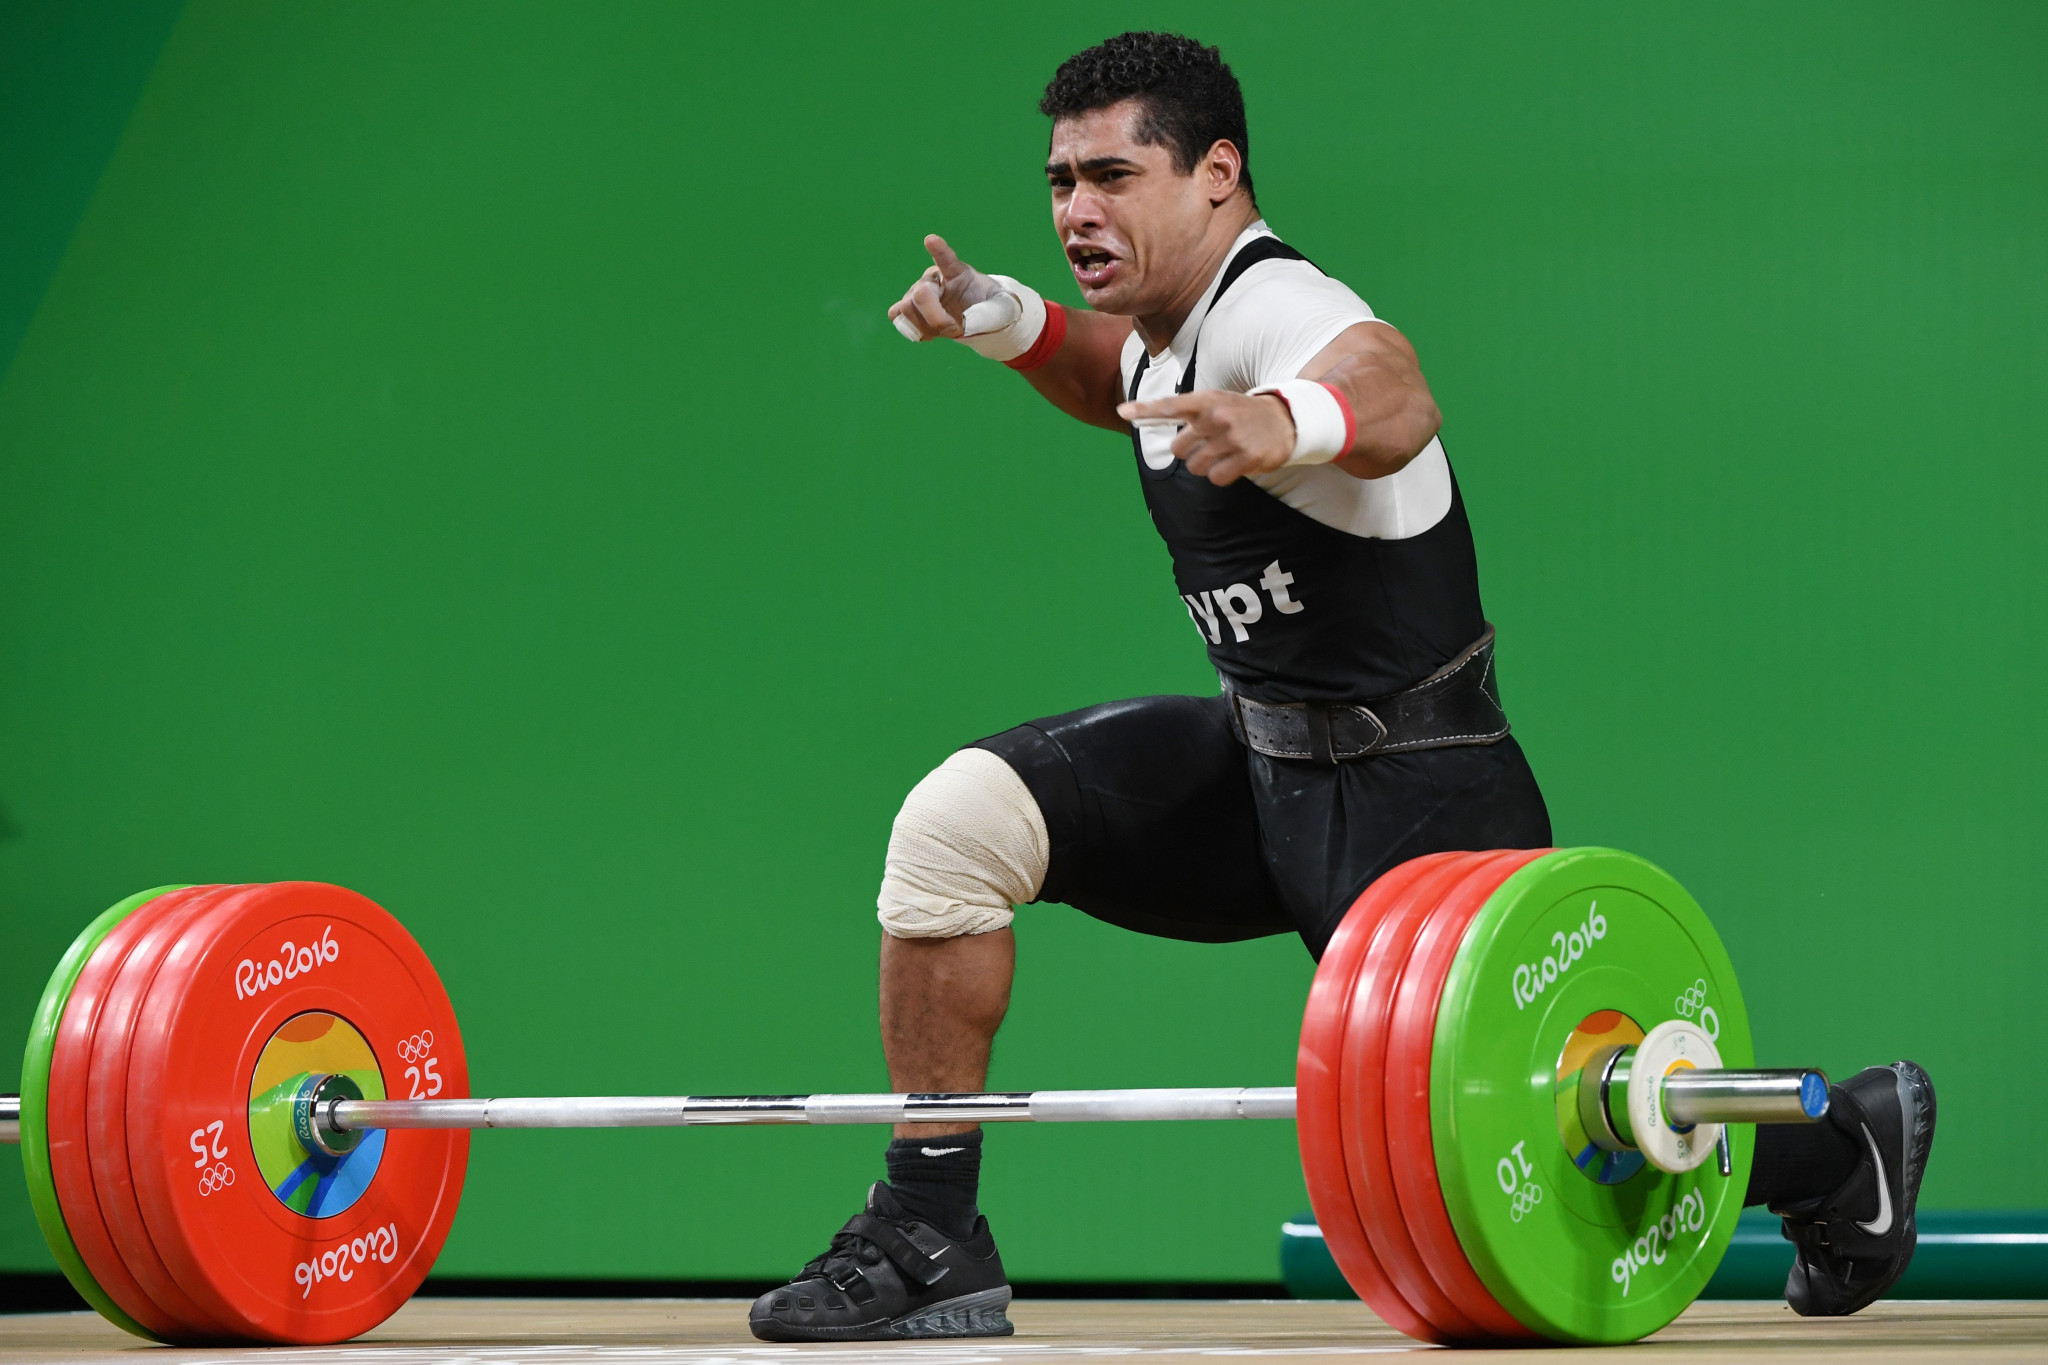 Egypt to pay $160,000 in hope of weightlifting World Championships reprieve